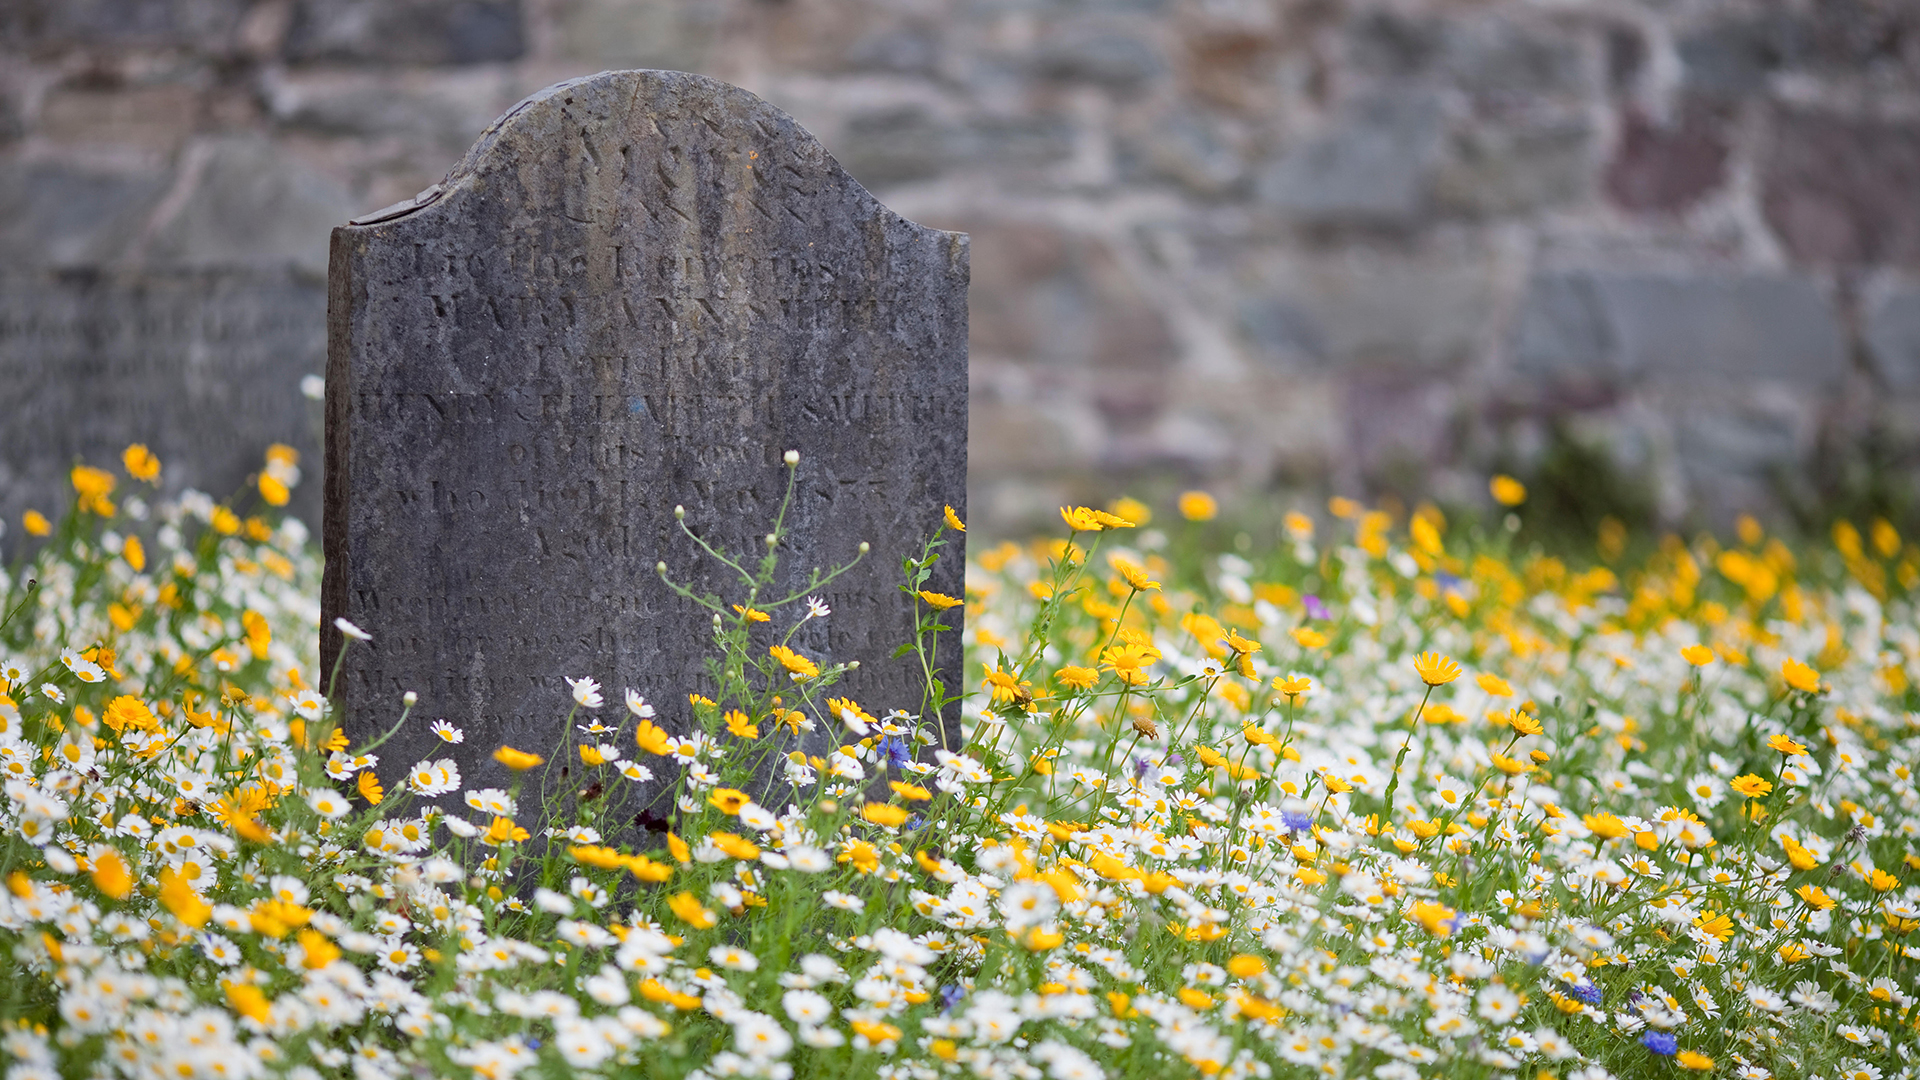 After you die, your microbiome cooperates with soil microbes to 'recycle' your body